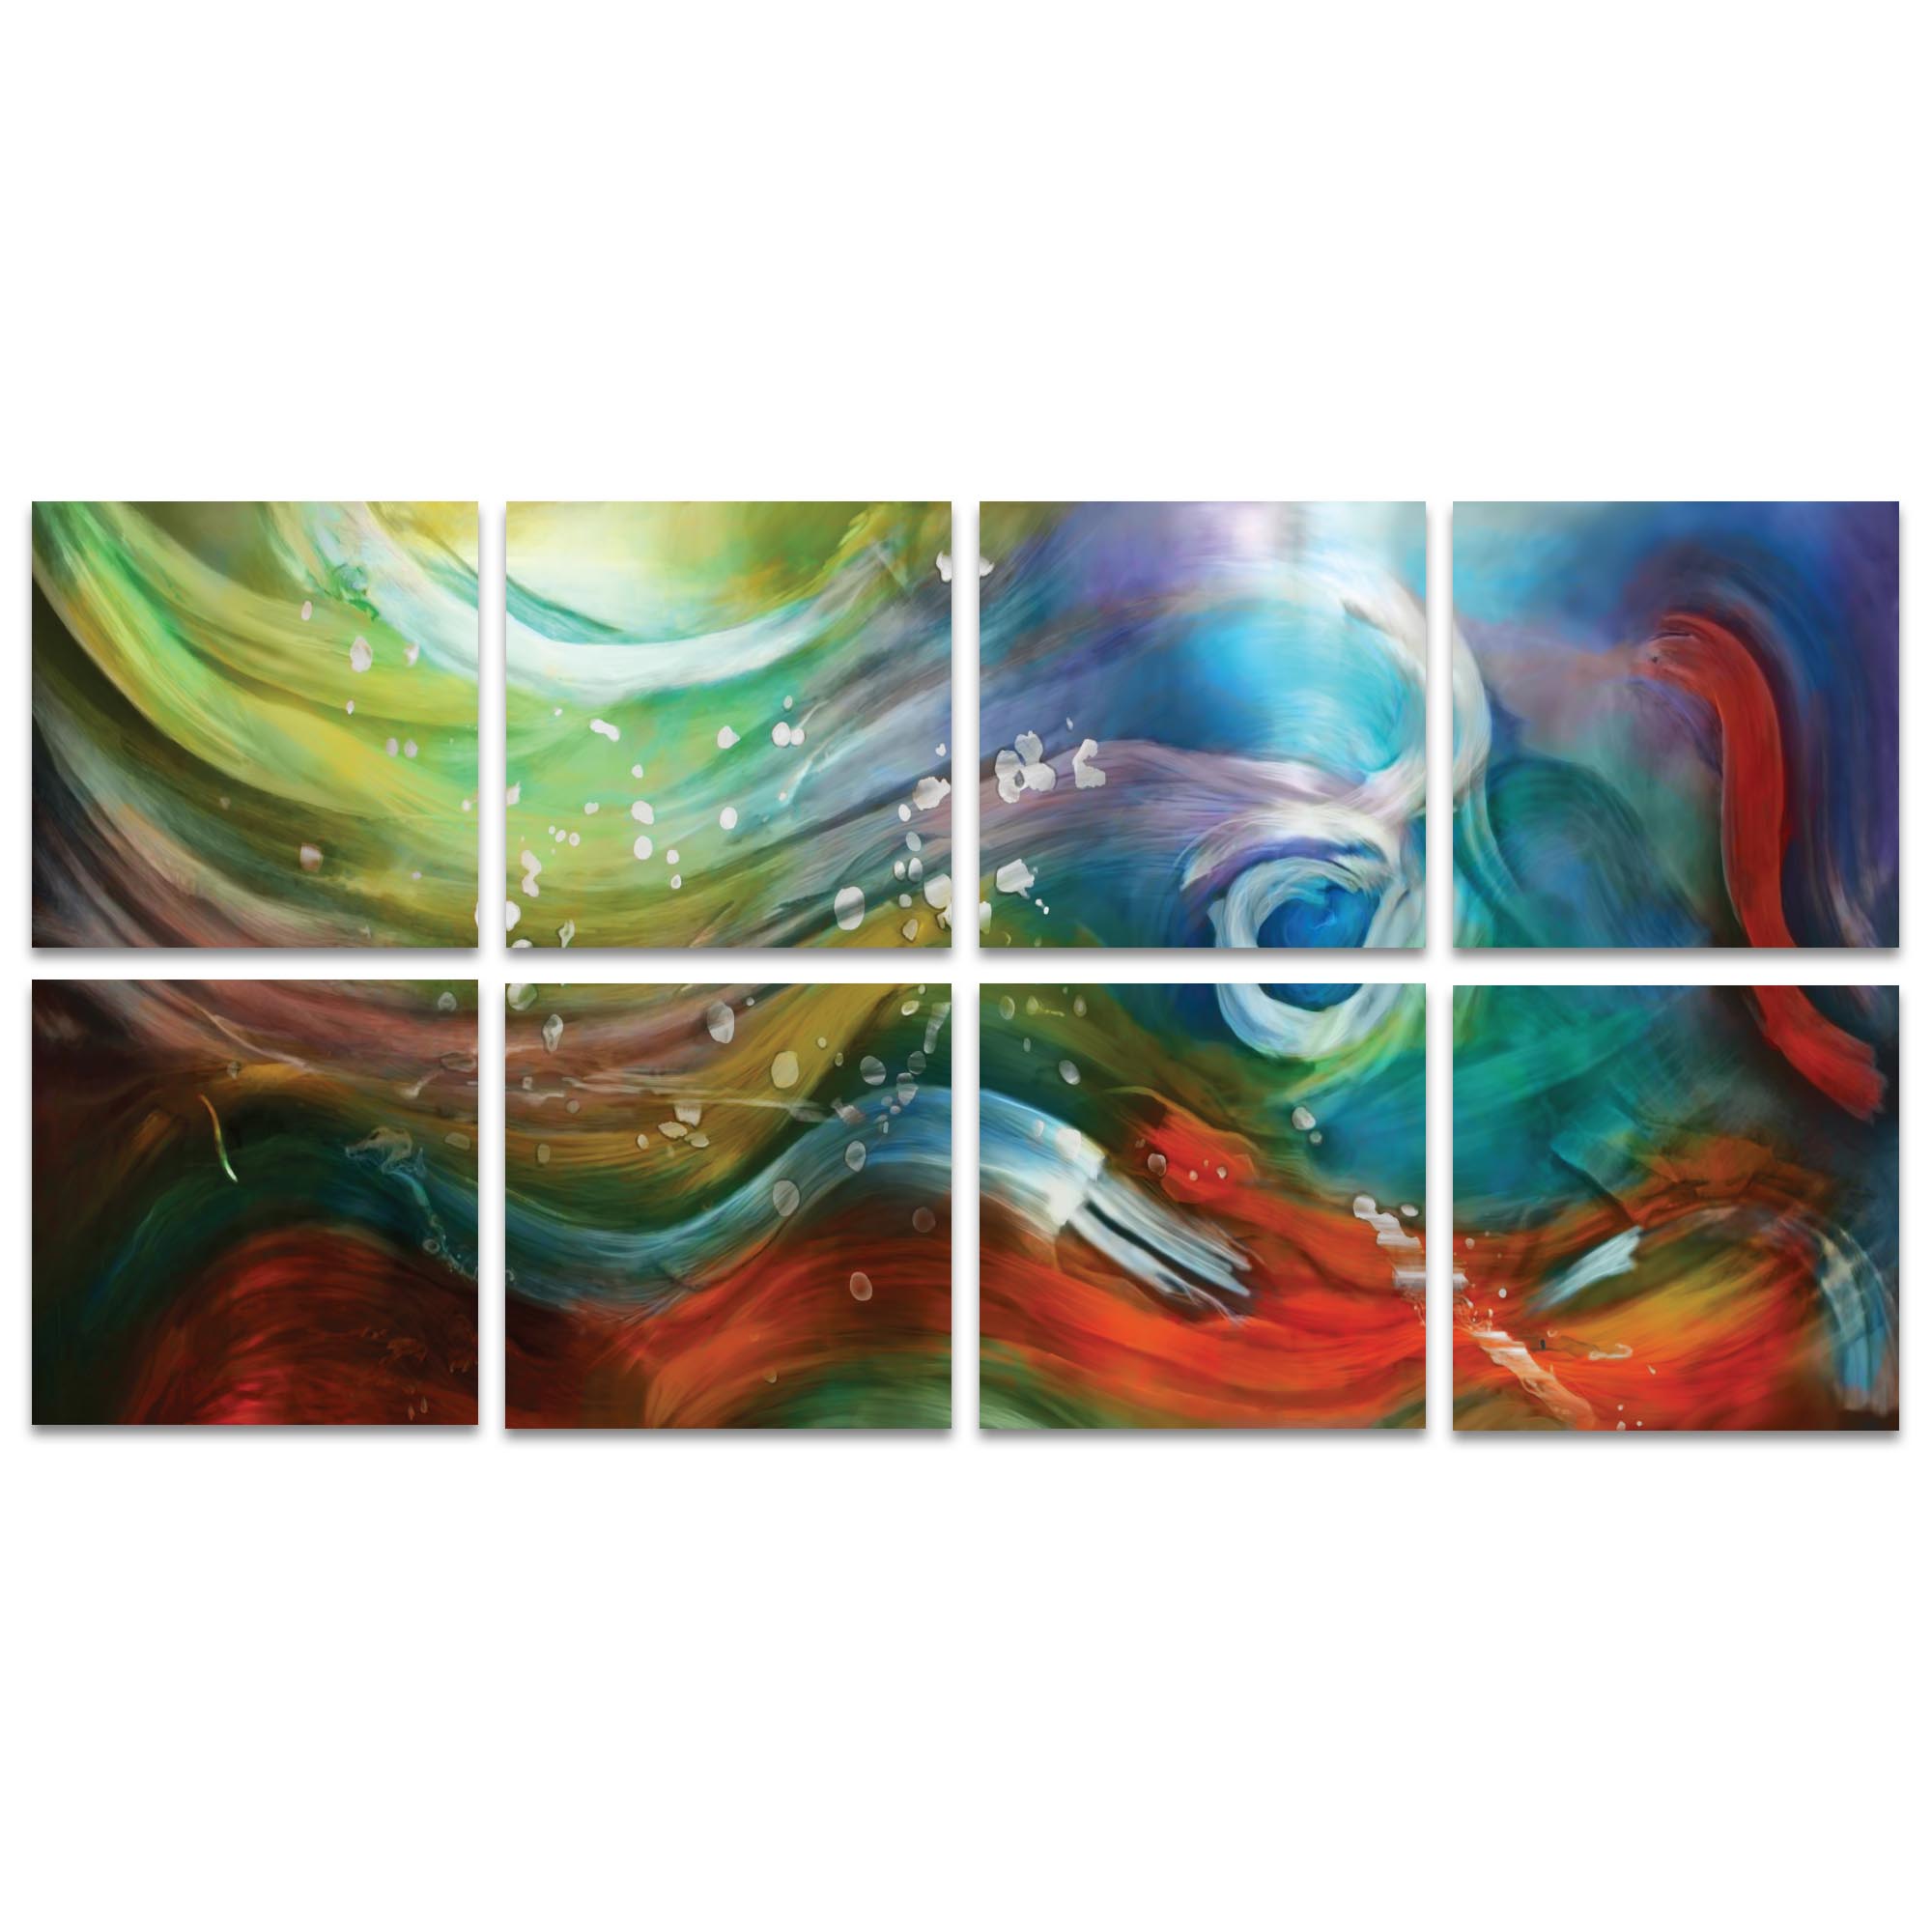 Esne Windows Large 94x46in. Metal or Acrylic Abstract Decor - Image 2